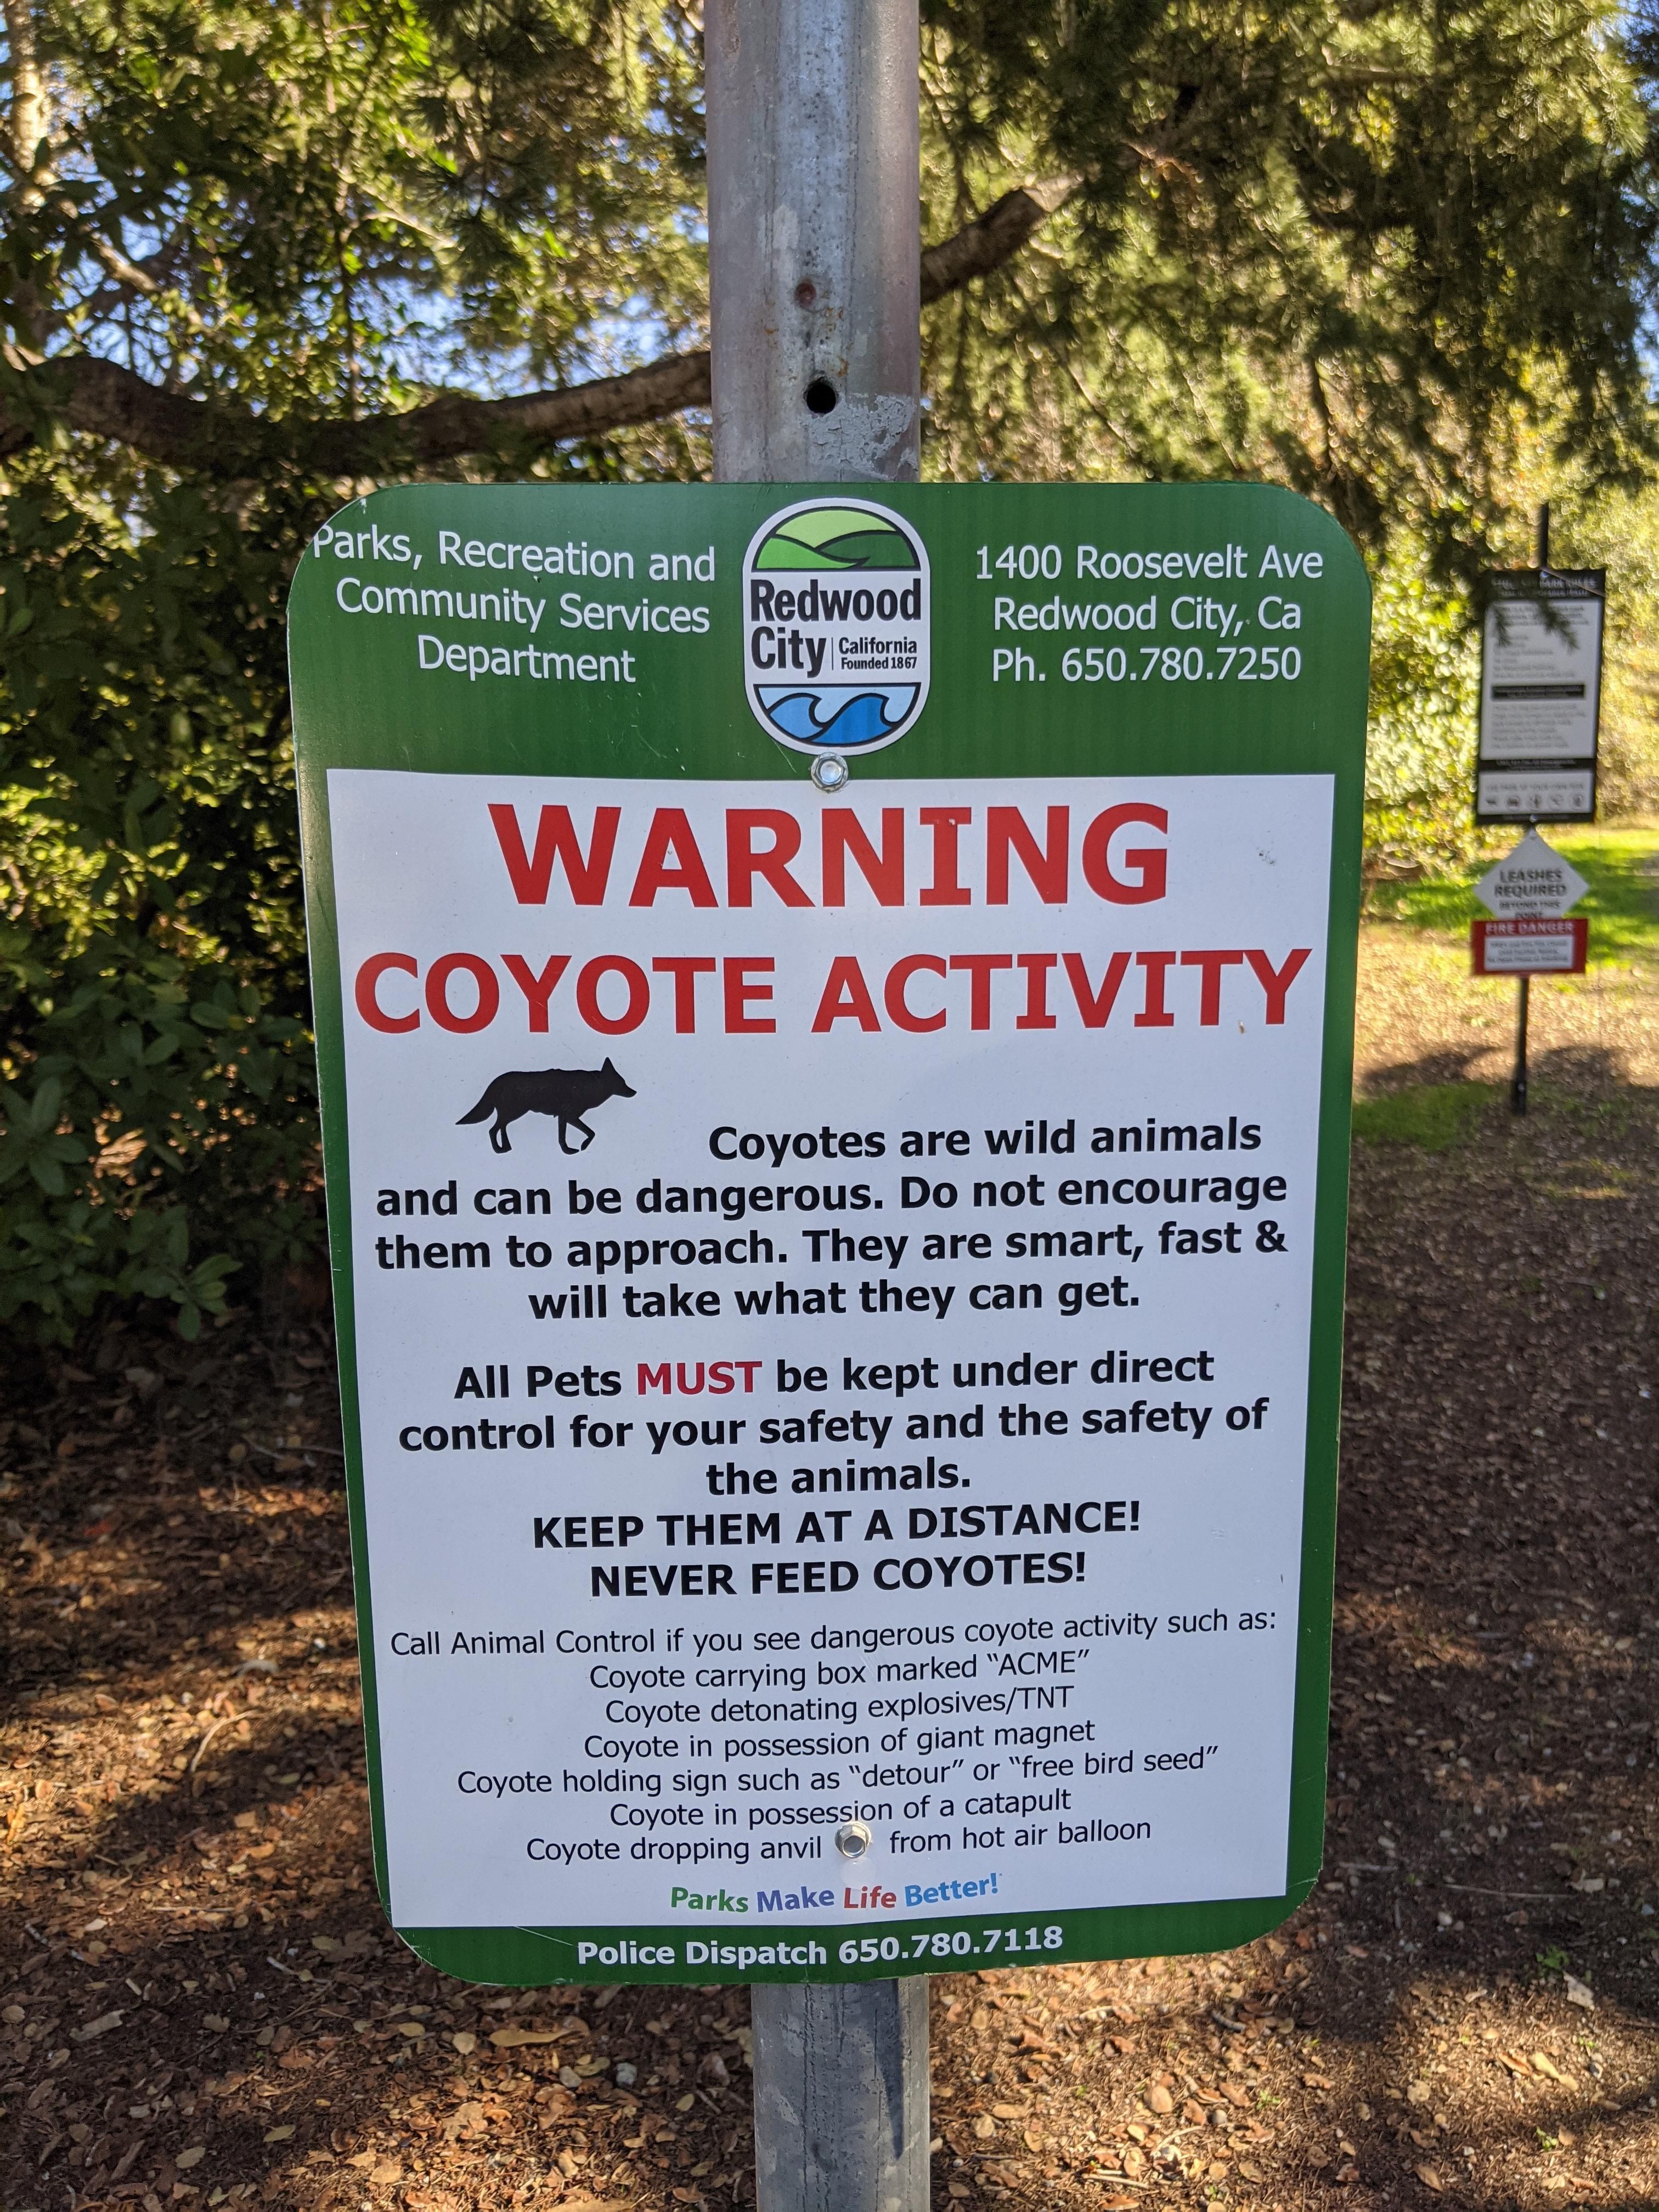 This coyote warning sign